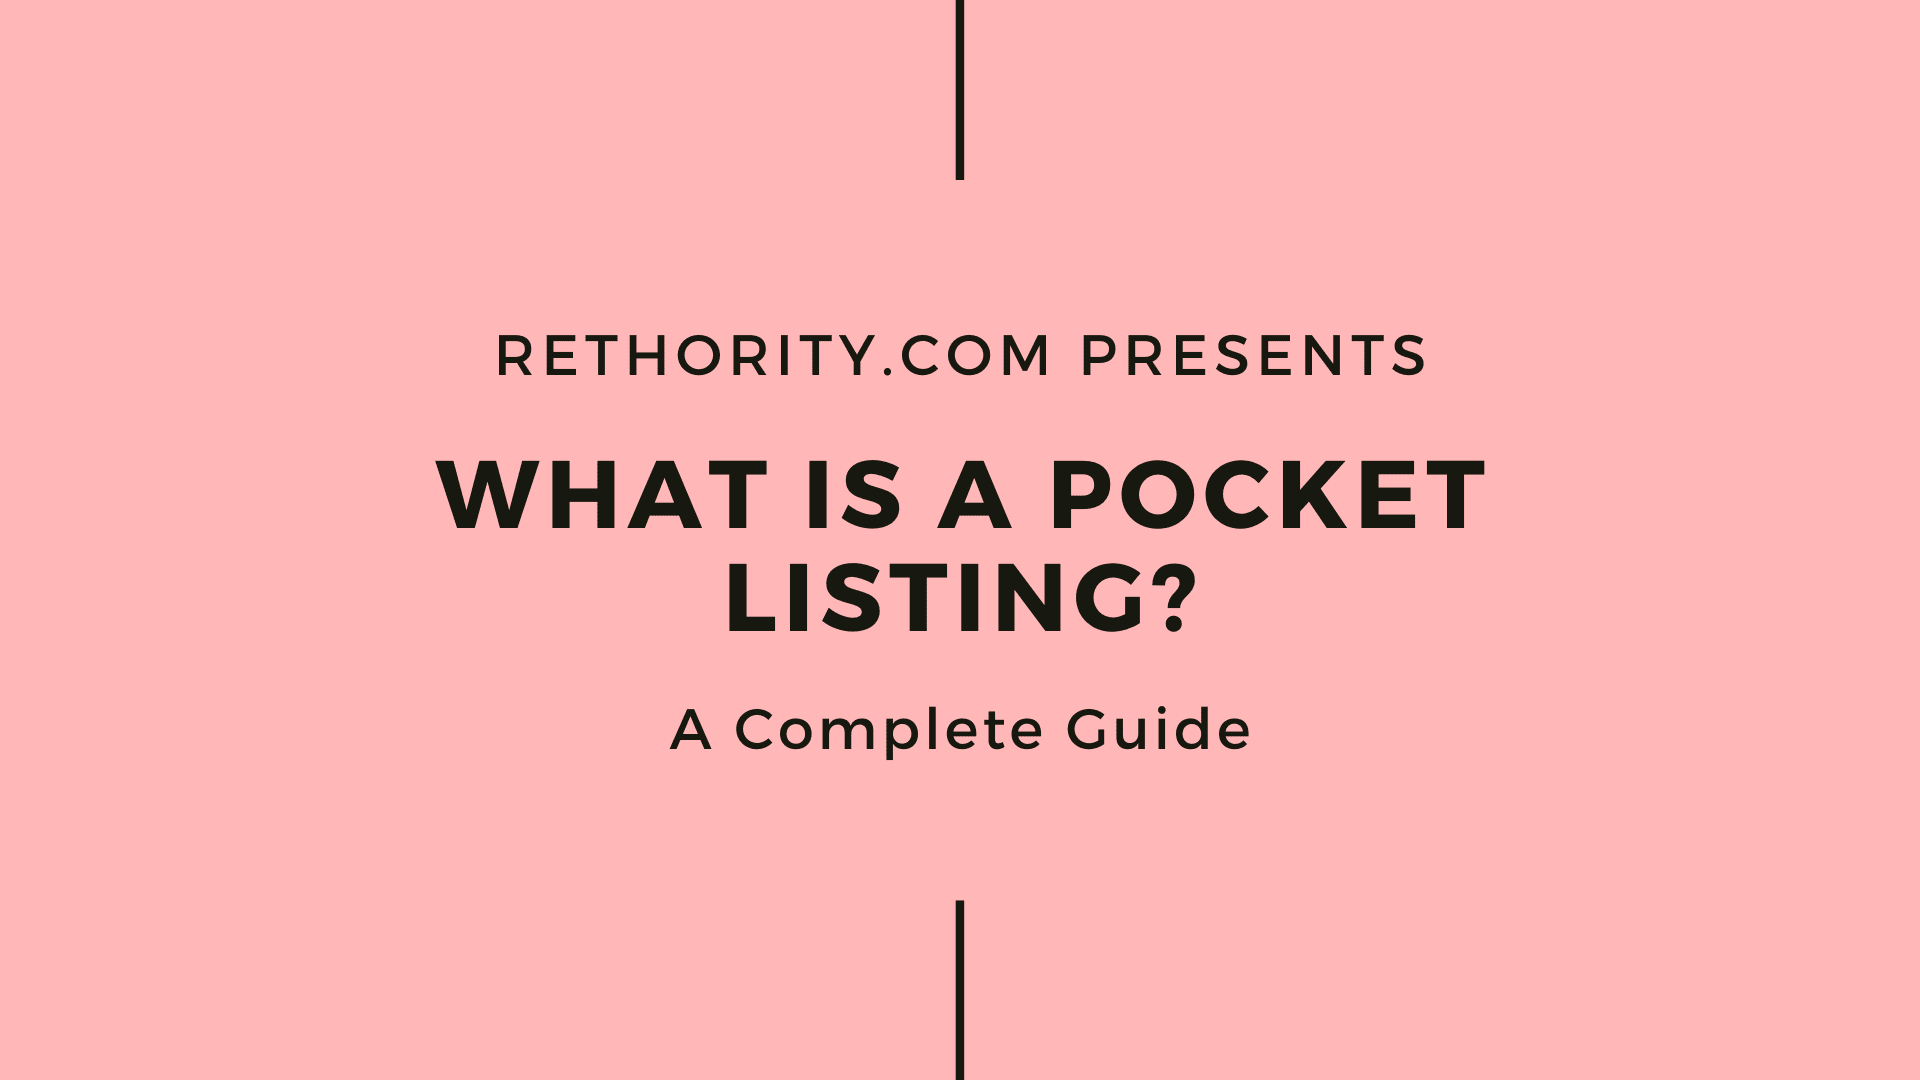 What Is a Pocket Listing?